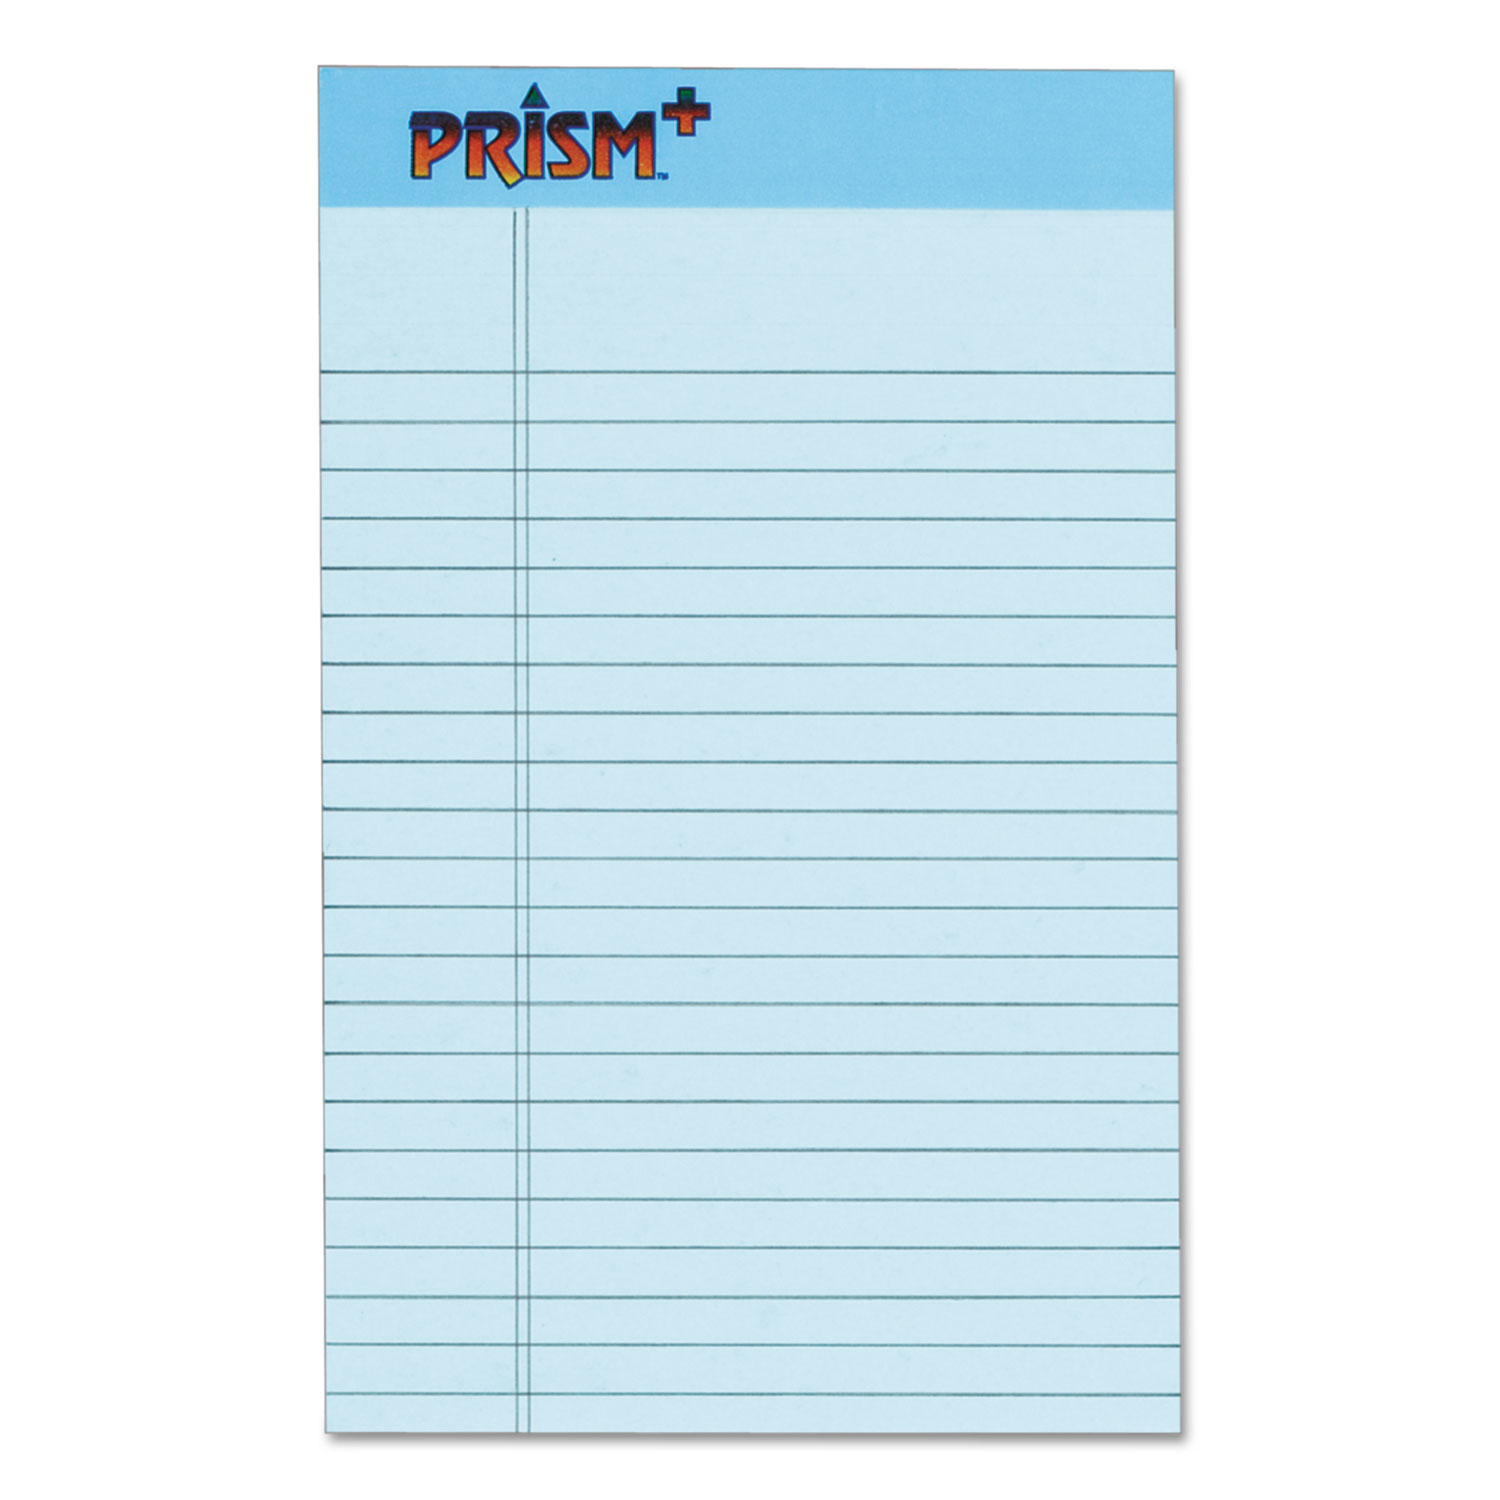  TOPS 63020 Prism + Writing Pads, Narrow Rule, 5 x 8, Pastel Blue, 50 Sheets, 12/Pack (TOP63020) 